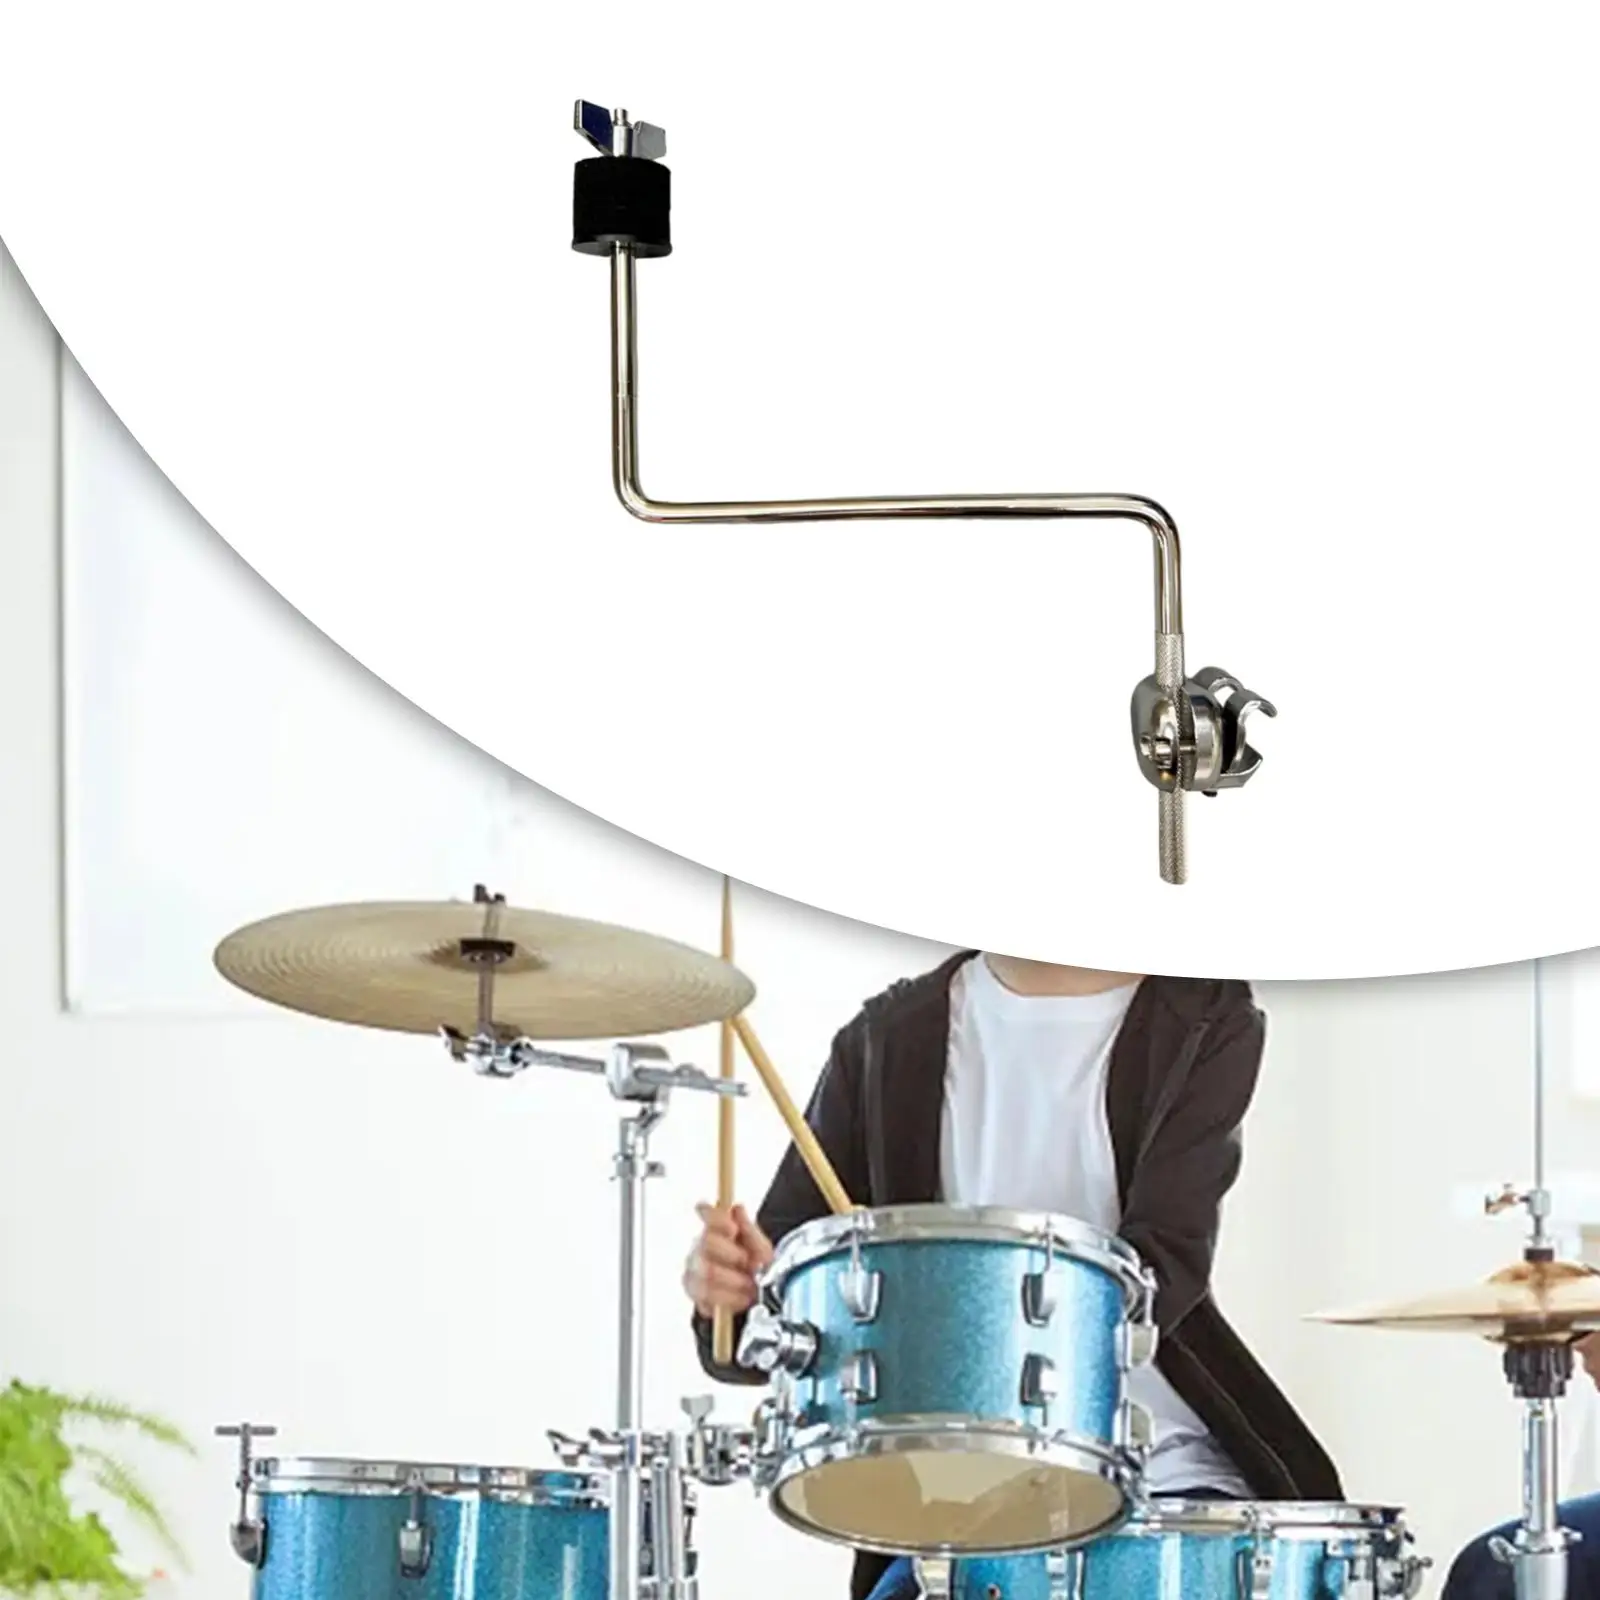 

Cymbal Mount Sturdy Removable Strong Z Shaped Adjustable Accessories Percussion Mounting Arms Cymbal Expand Arm Cymbal Arm Clamp